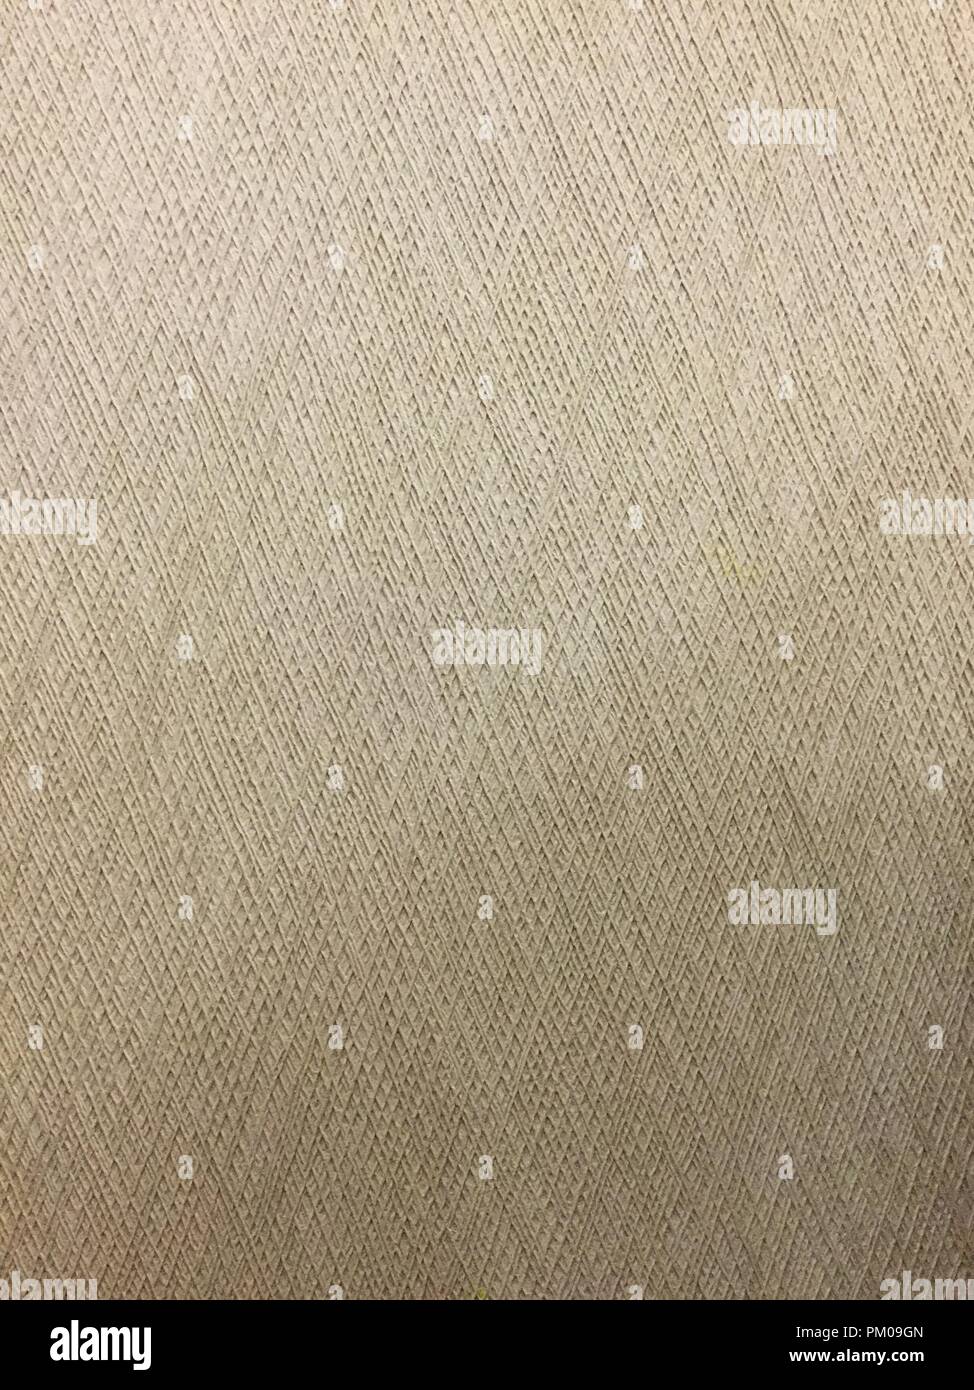 Beige wall covering with rough textures and designs. Stock Photo